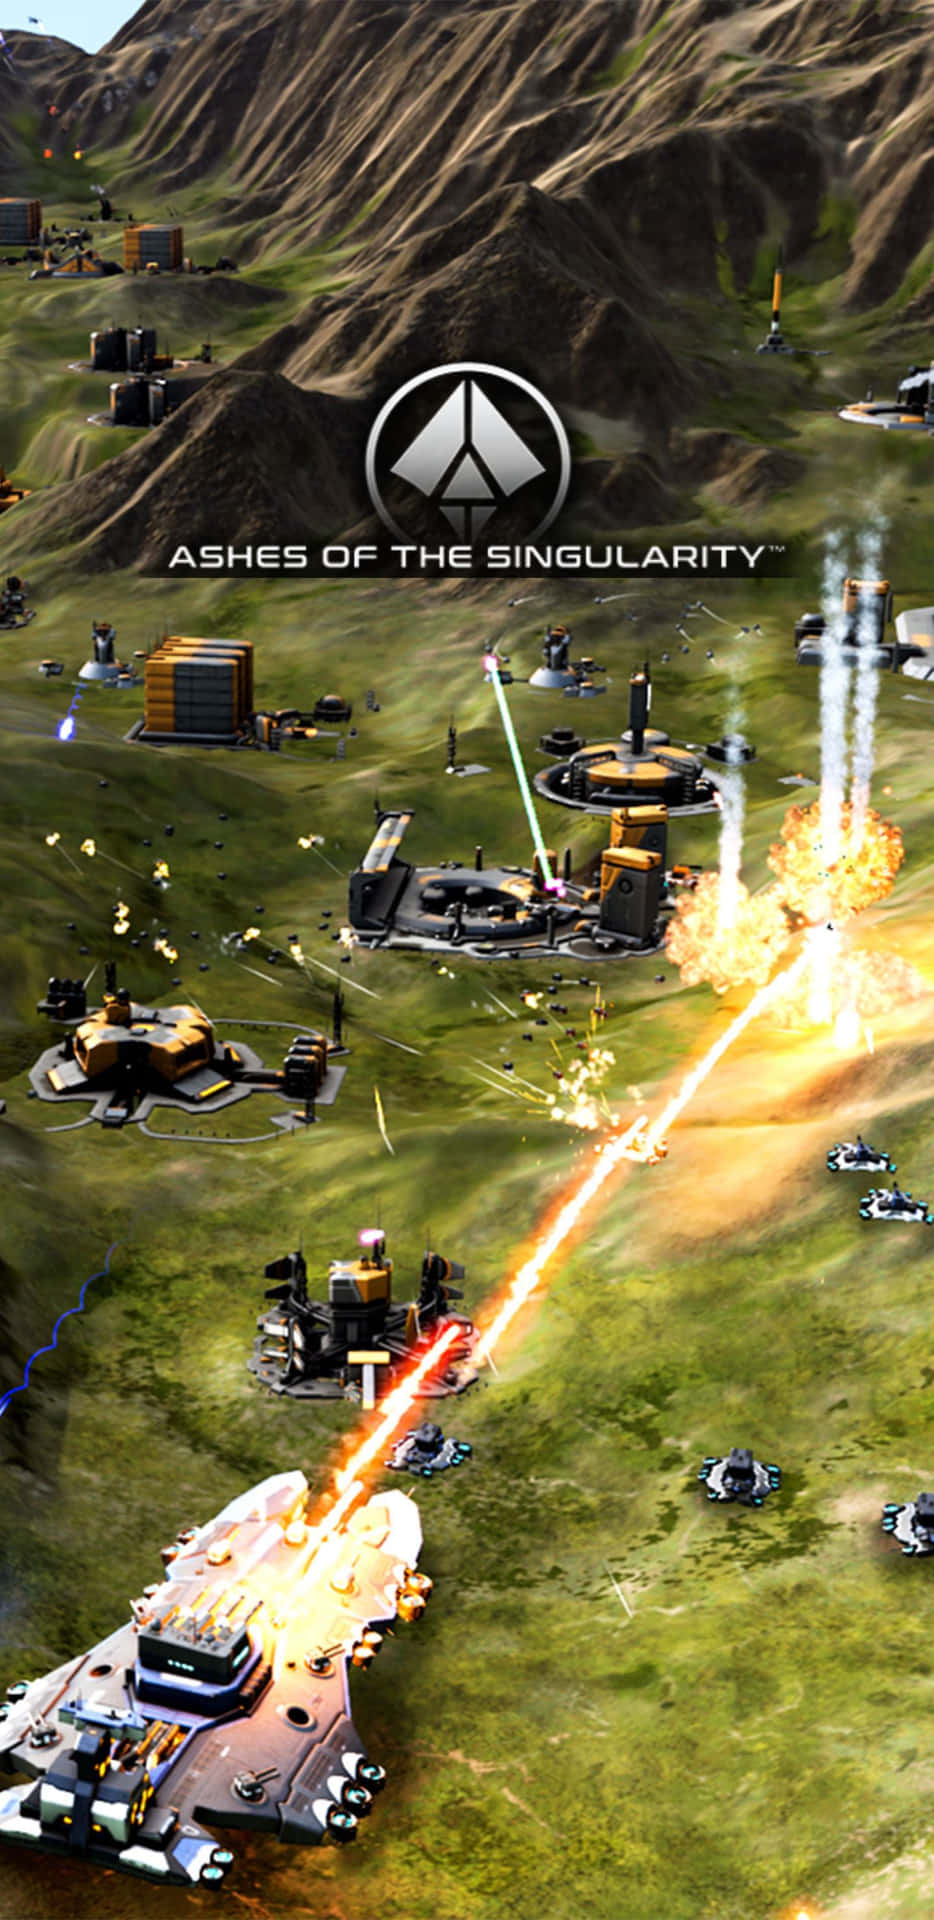 Immerse Yourself in Ashes of the Singularity on Google Pixel 3XL